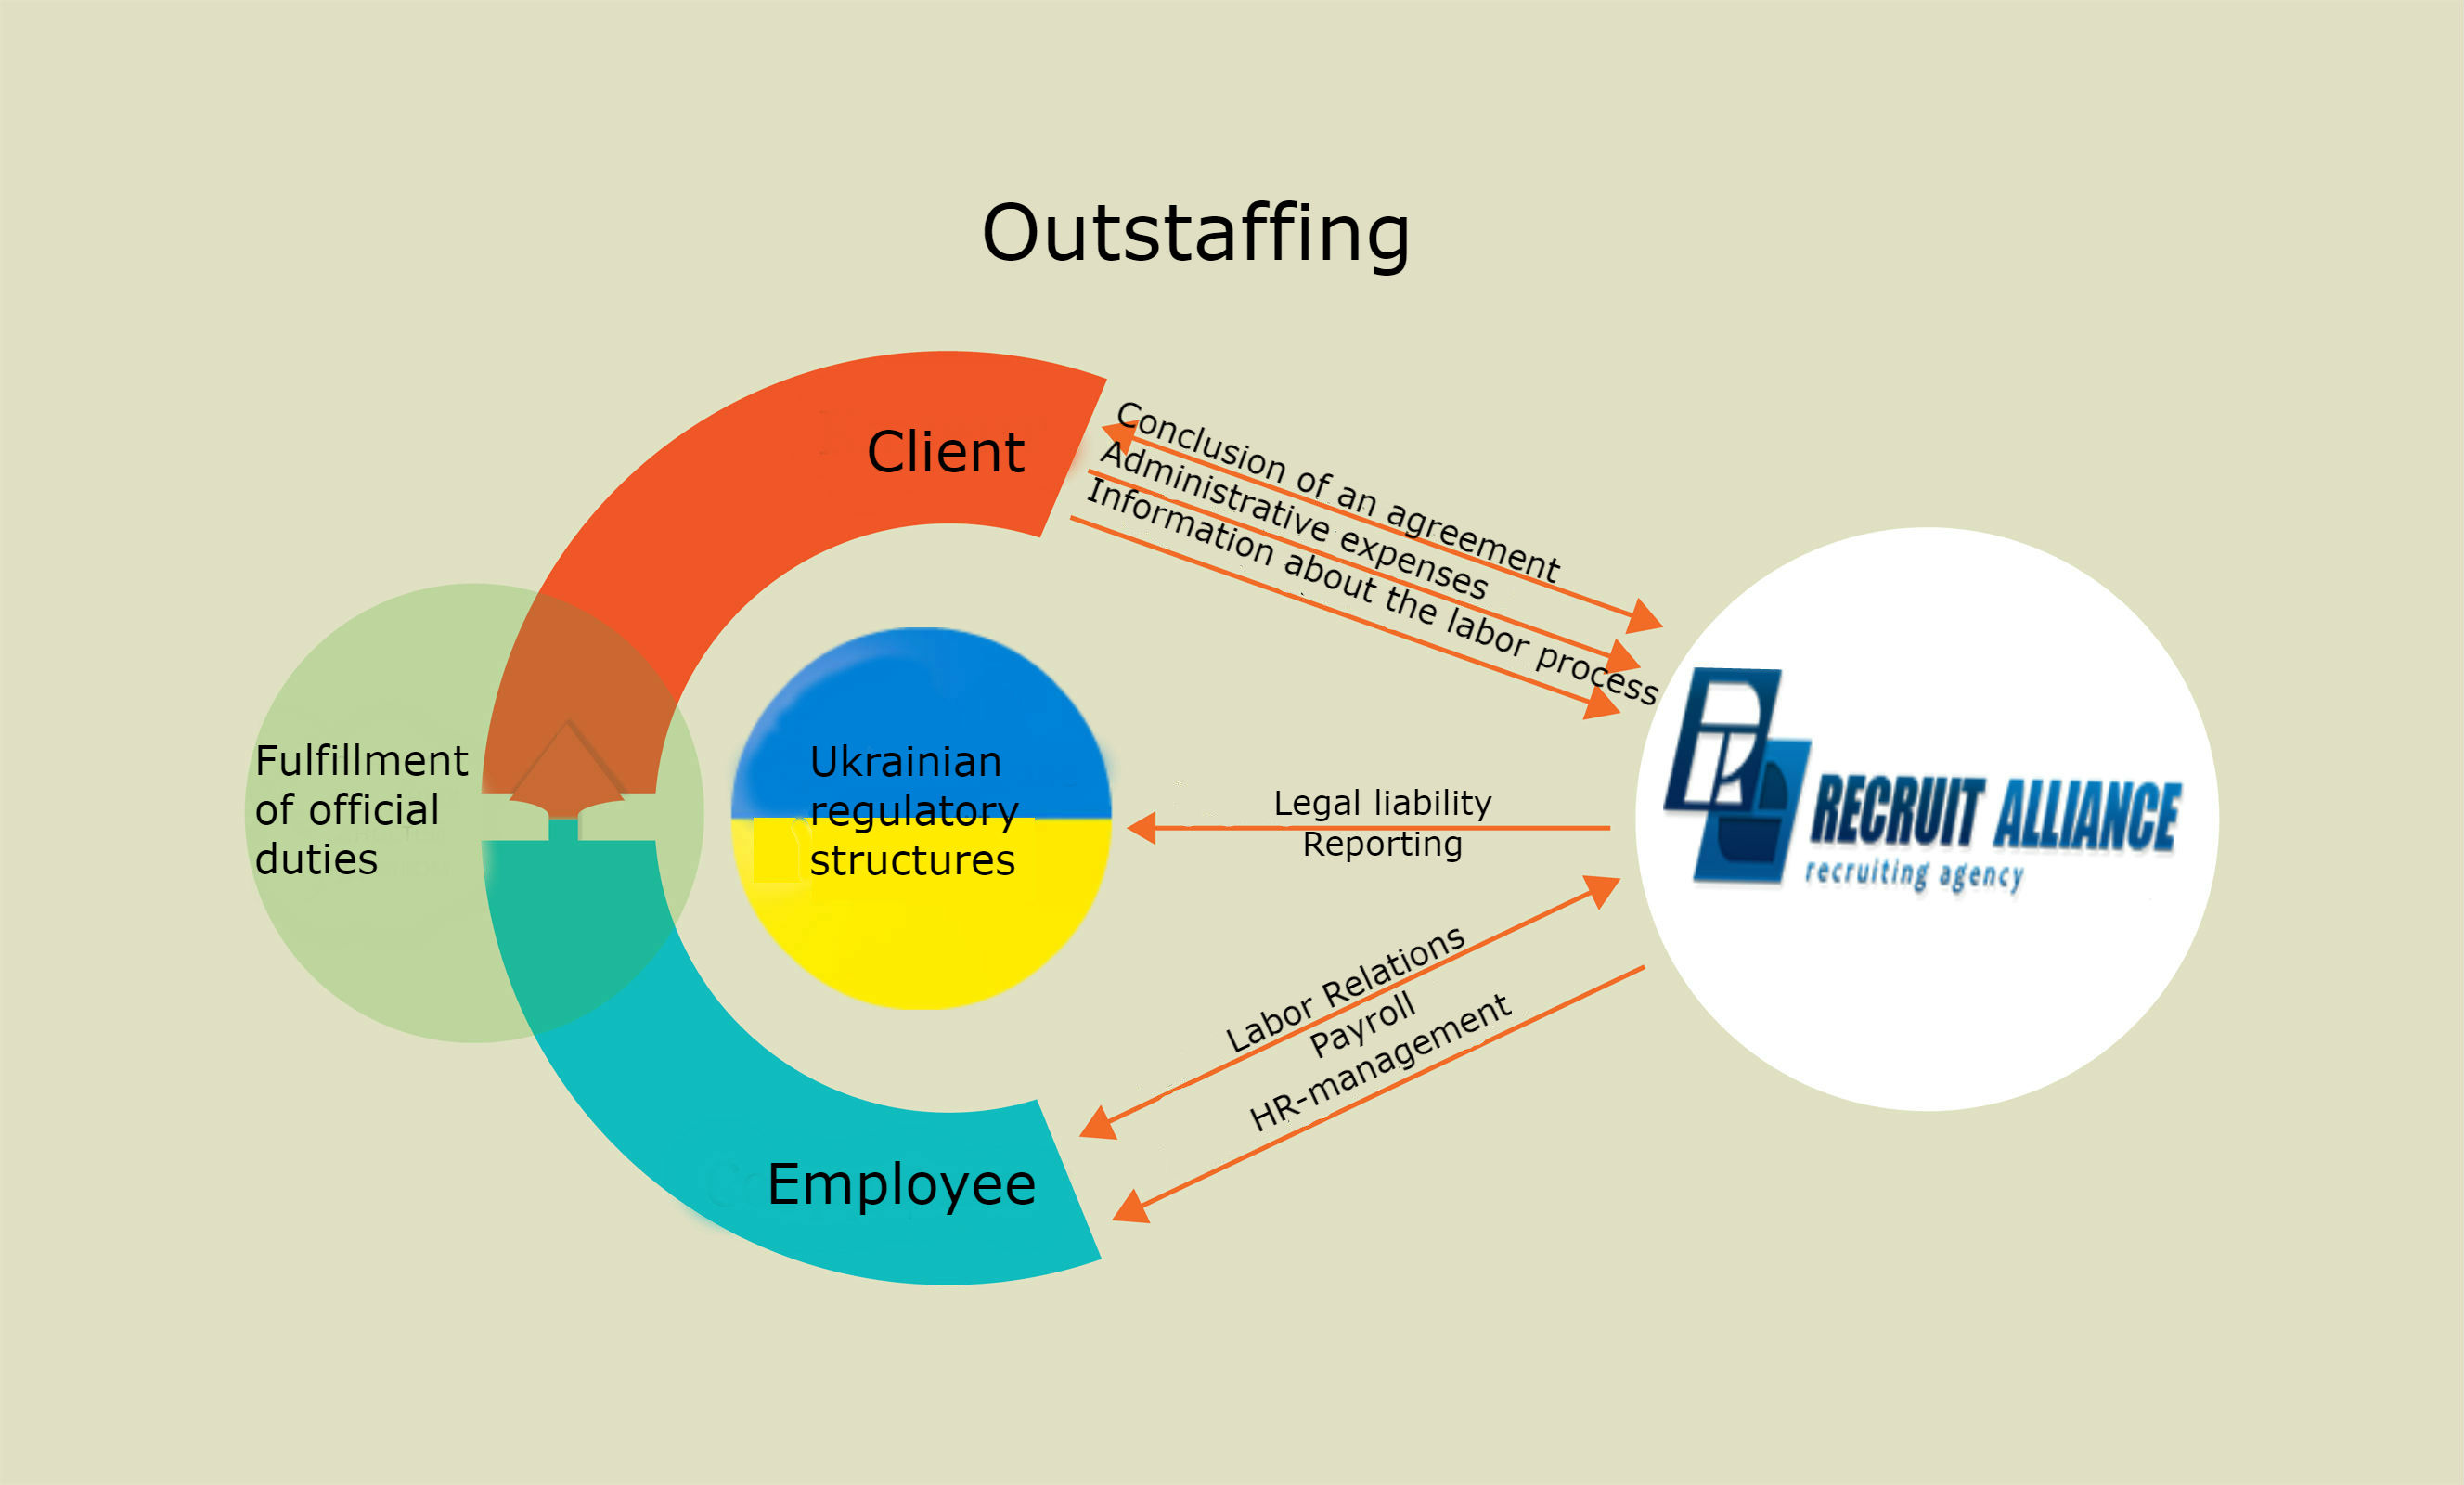 OUTSTAFFING: WHAT YOU NEED TO KNOW NOT TO BE MISTAKEN